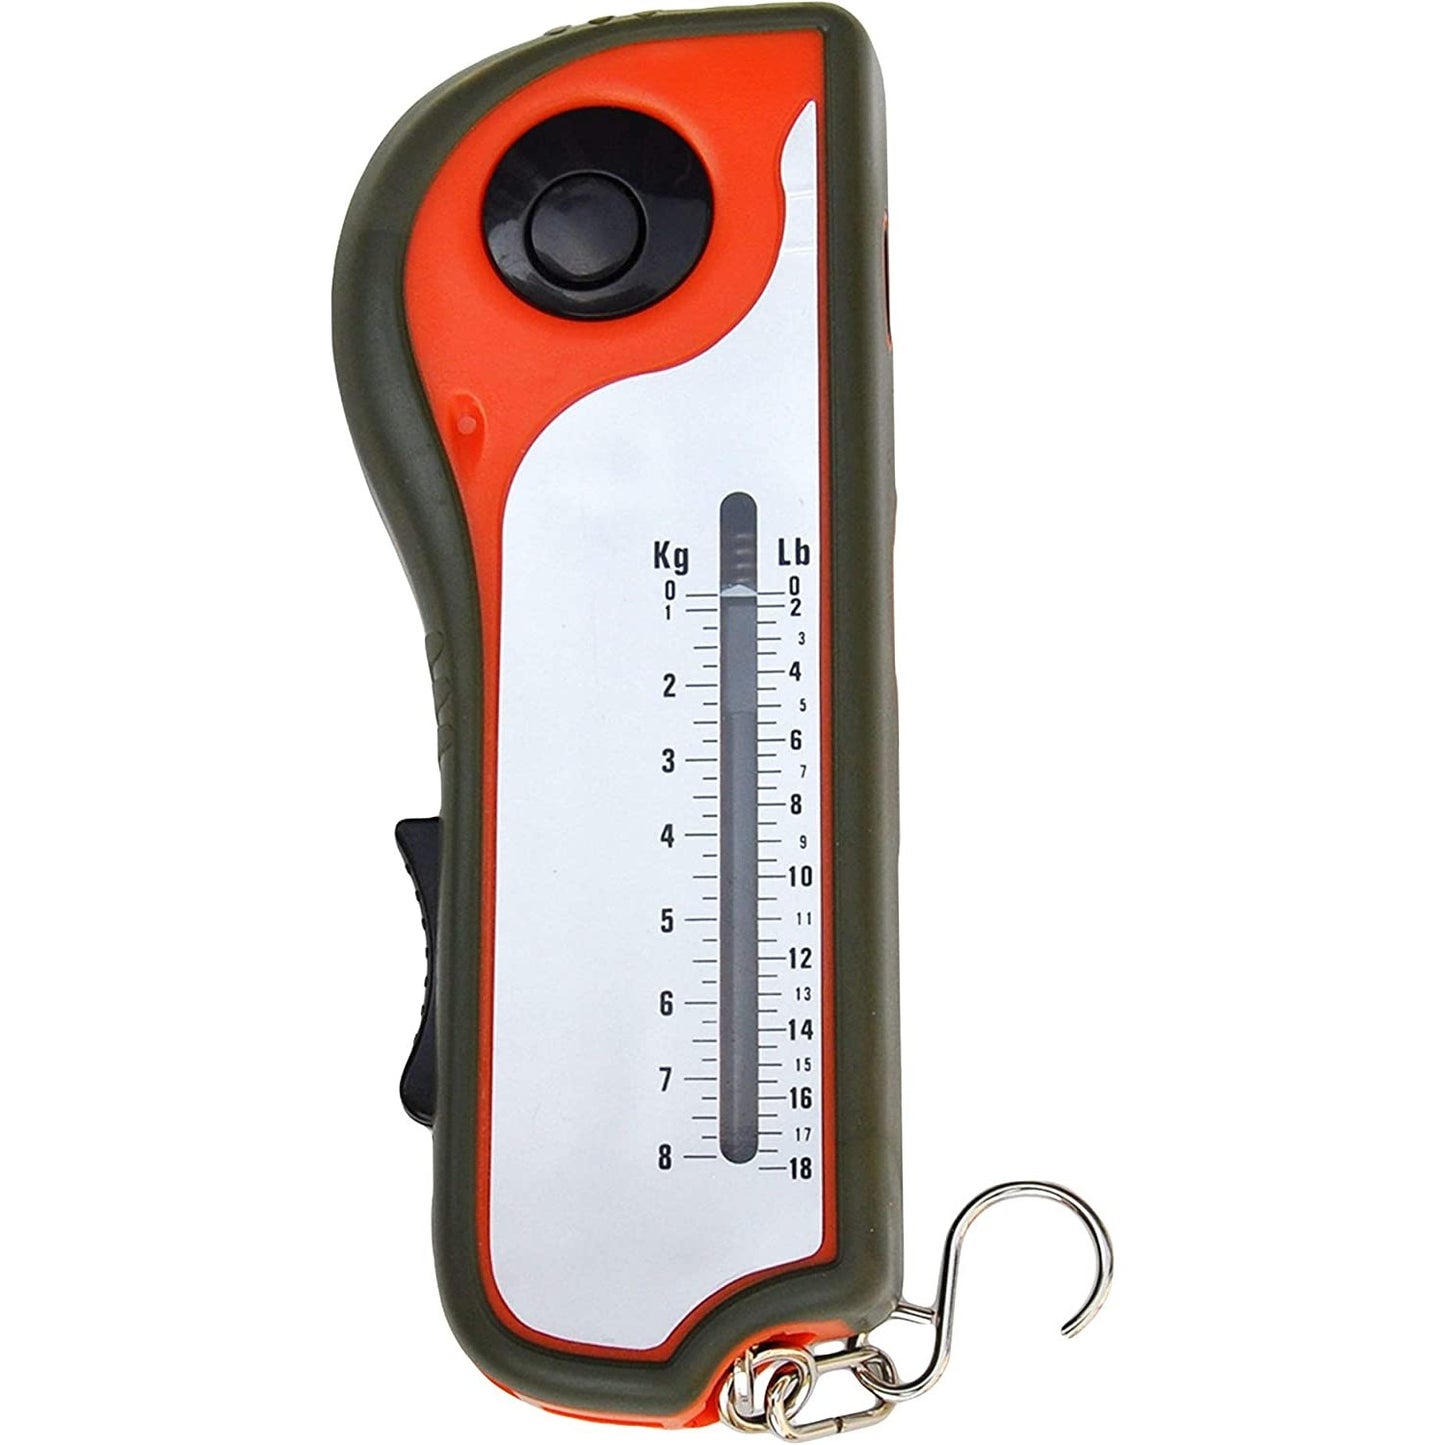 A close-up view of a 10-in-1 fishing multi-tool